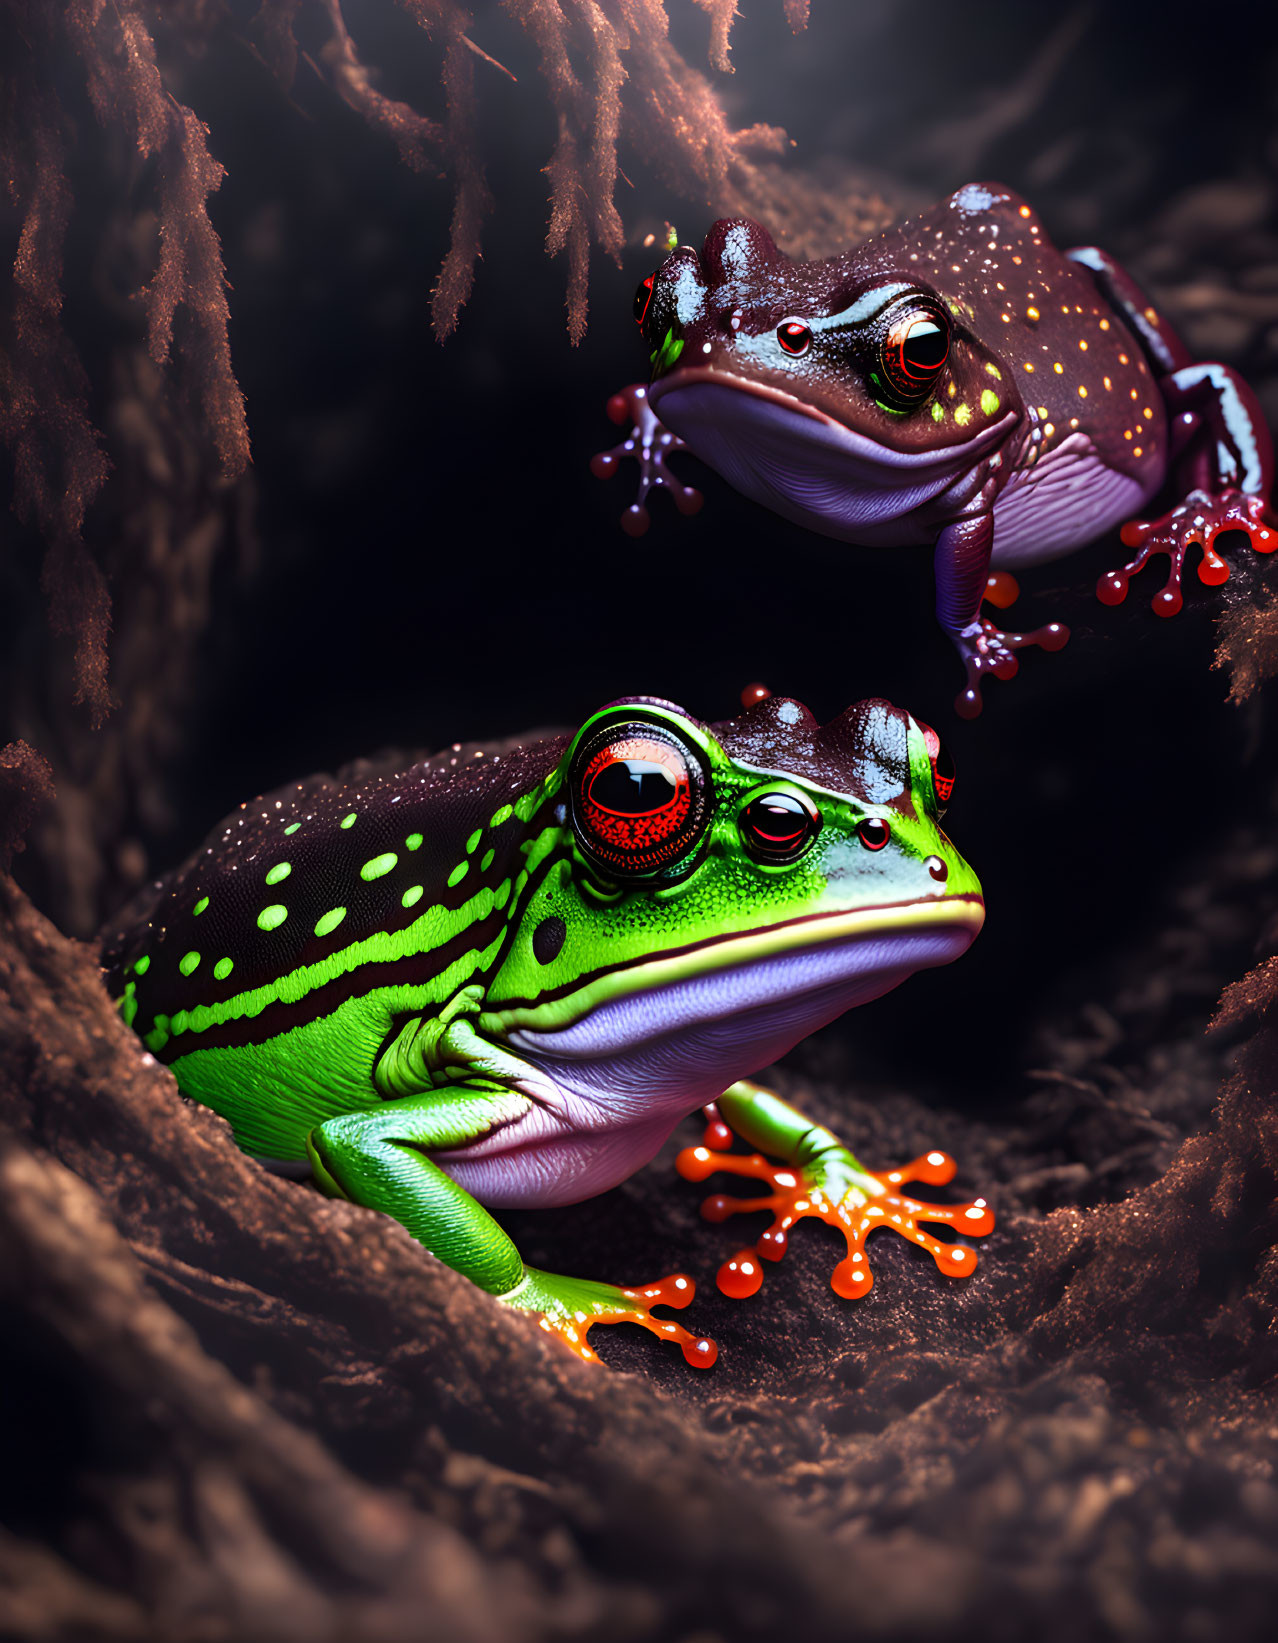 Colorful Frogs on Branches in Earthy Setting